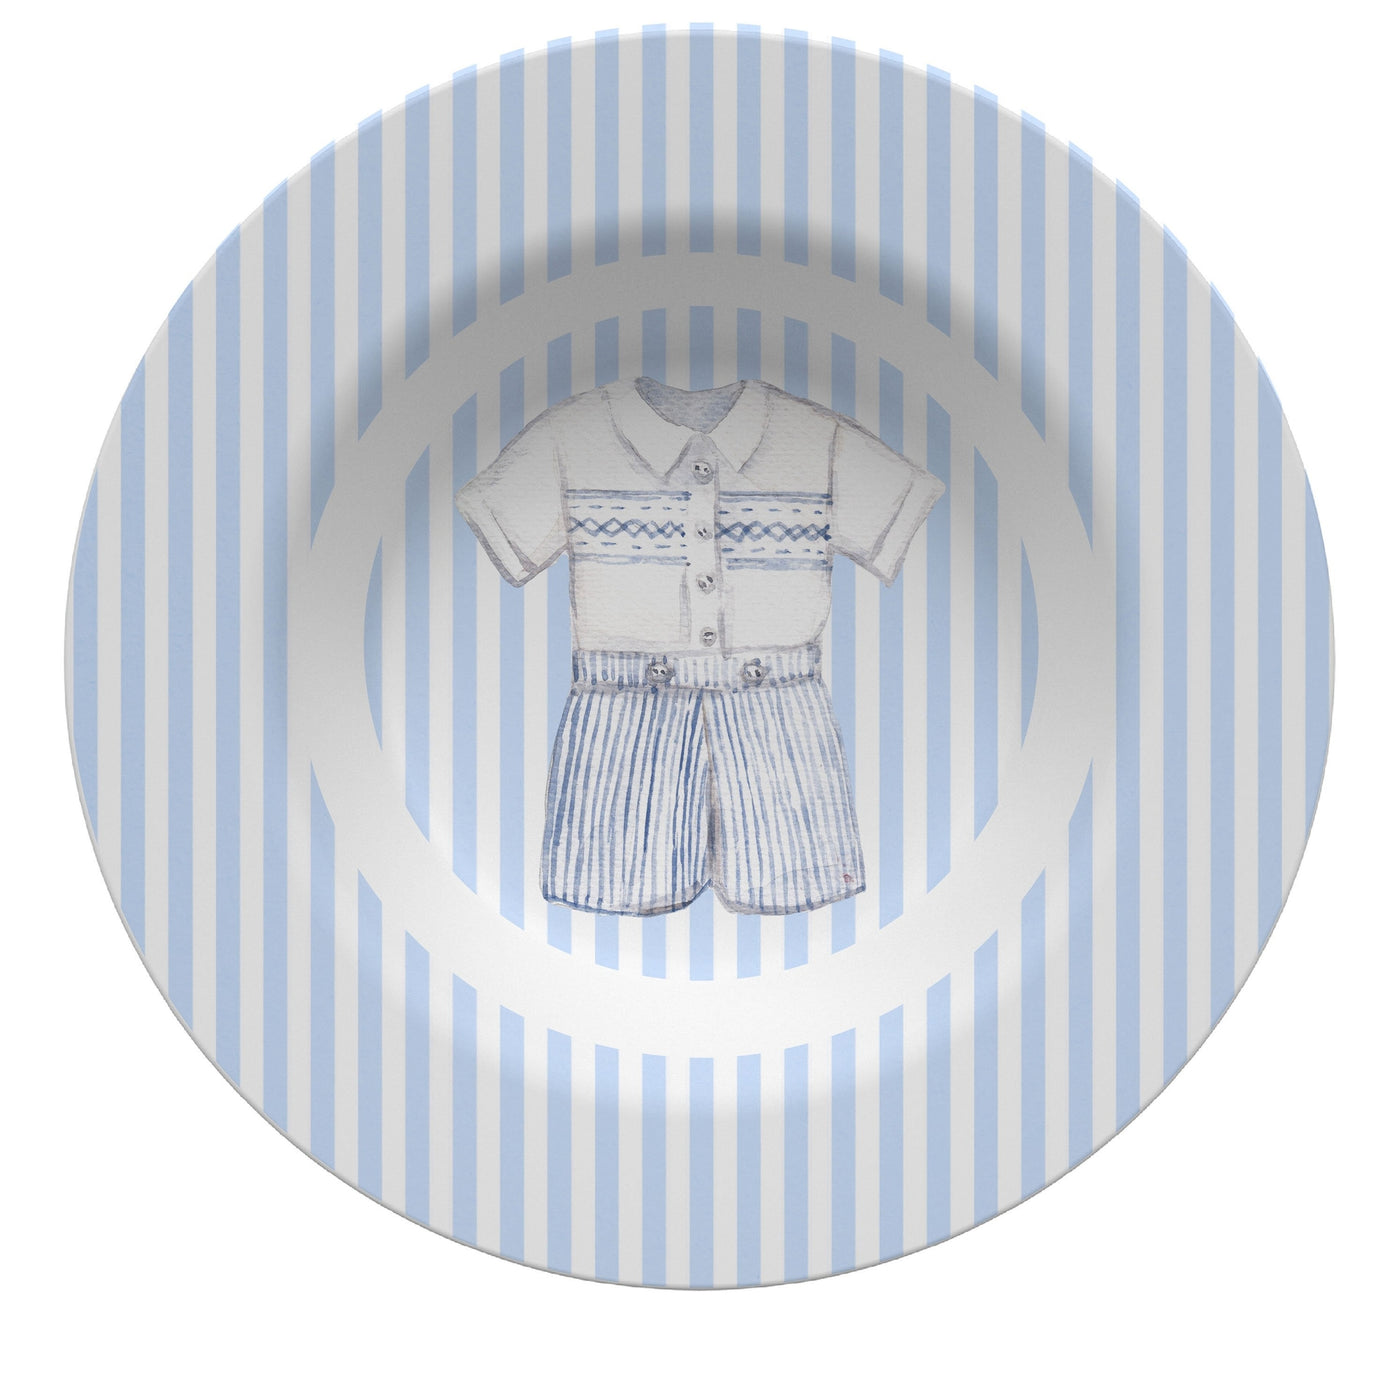 Thermosaf Dinnerware - William Buster Suit (Babies + Kids) - Bowl